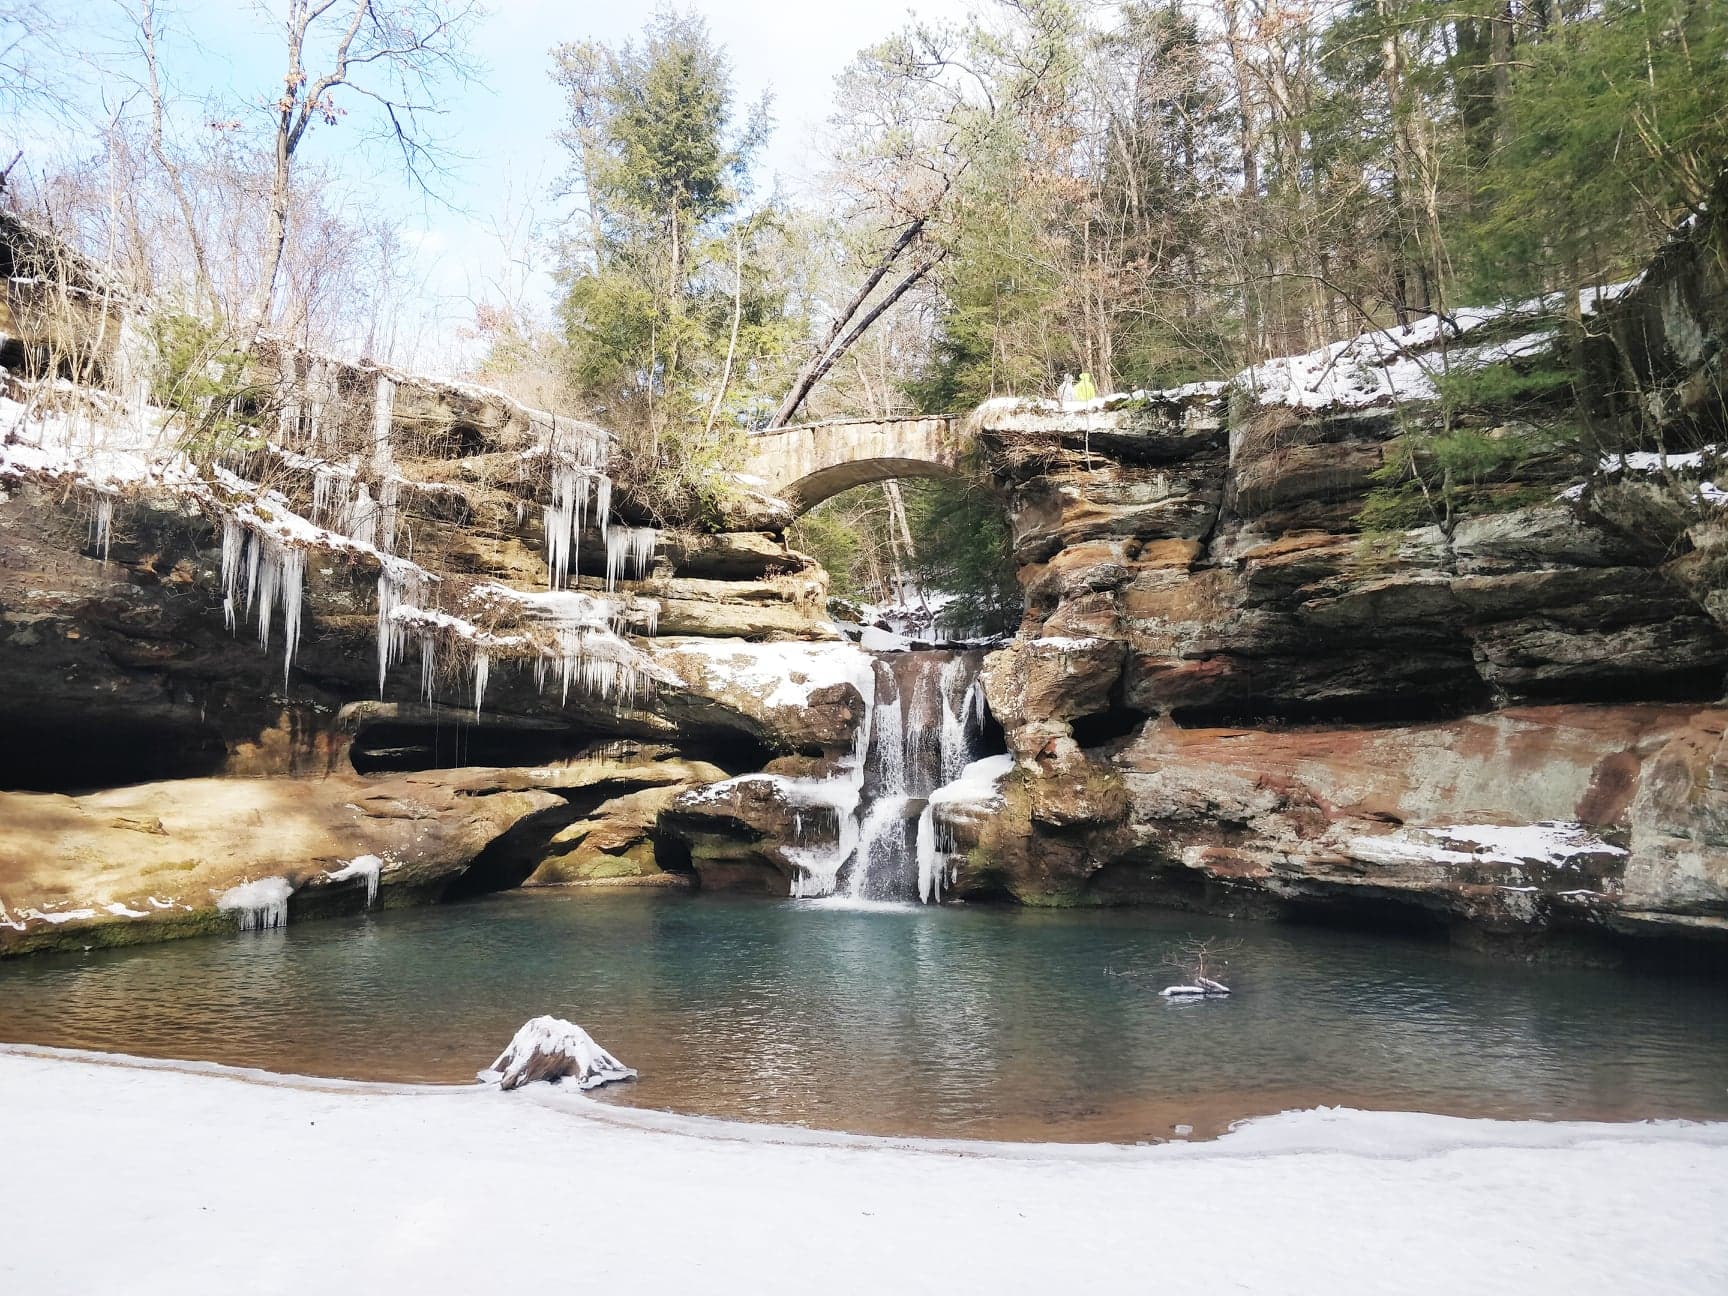 5 Tips for Winter Hiking in The Hocking Hills